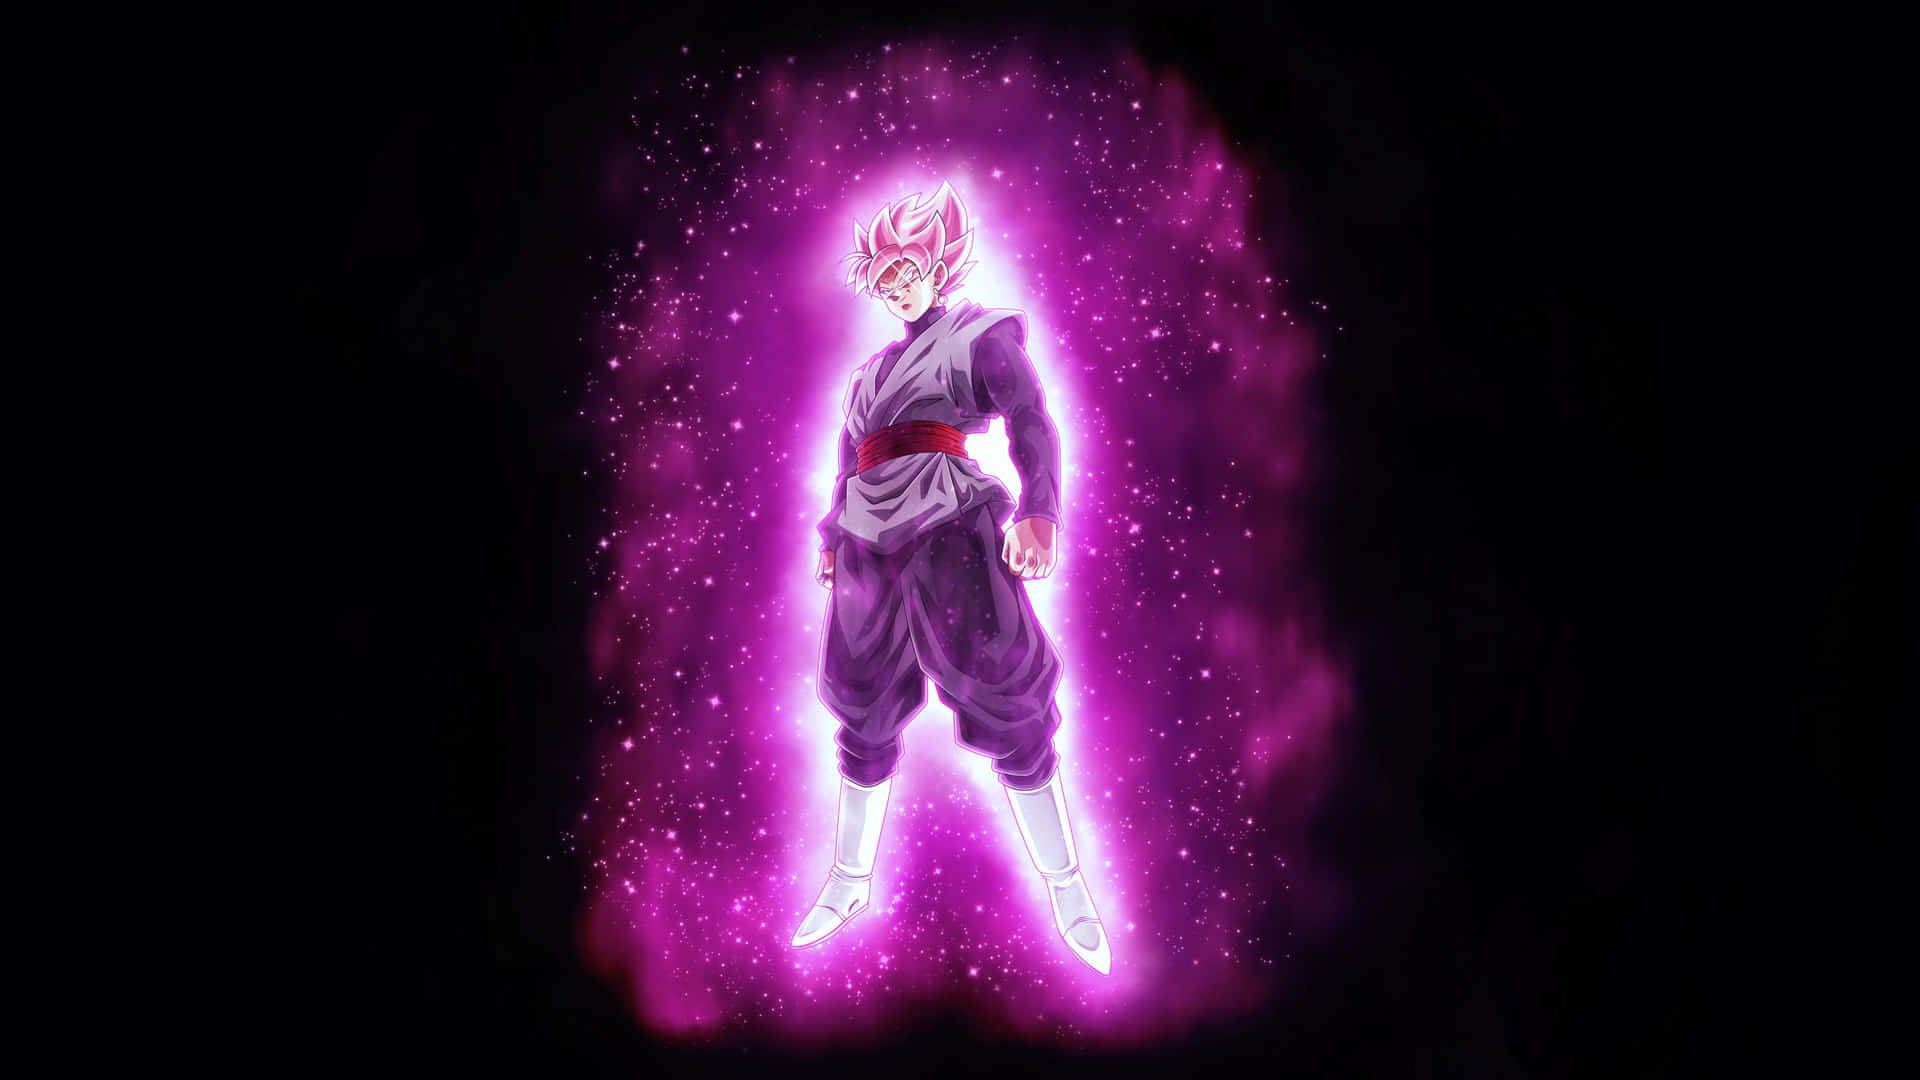 Show Your Strength And Unleash Your Power With The Dragon Ball Super - Goku Black 4k Wallpaper